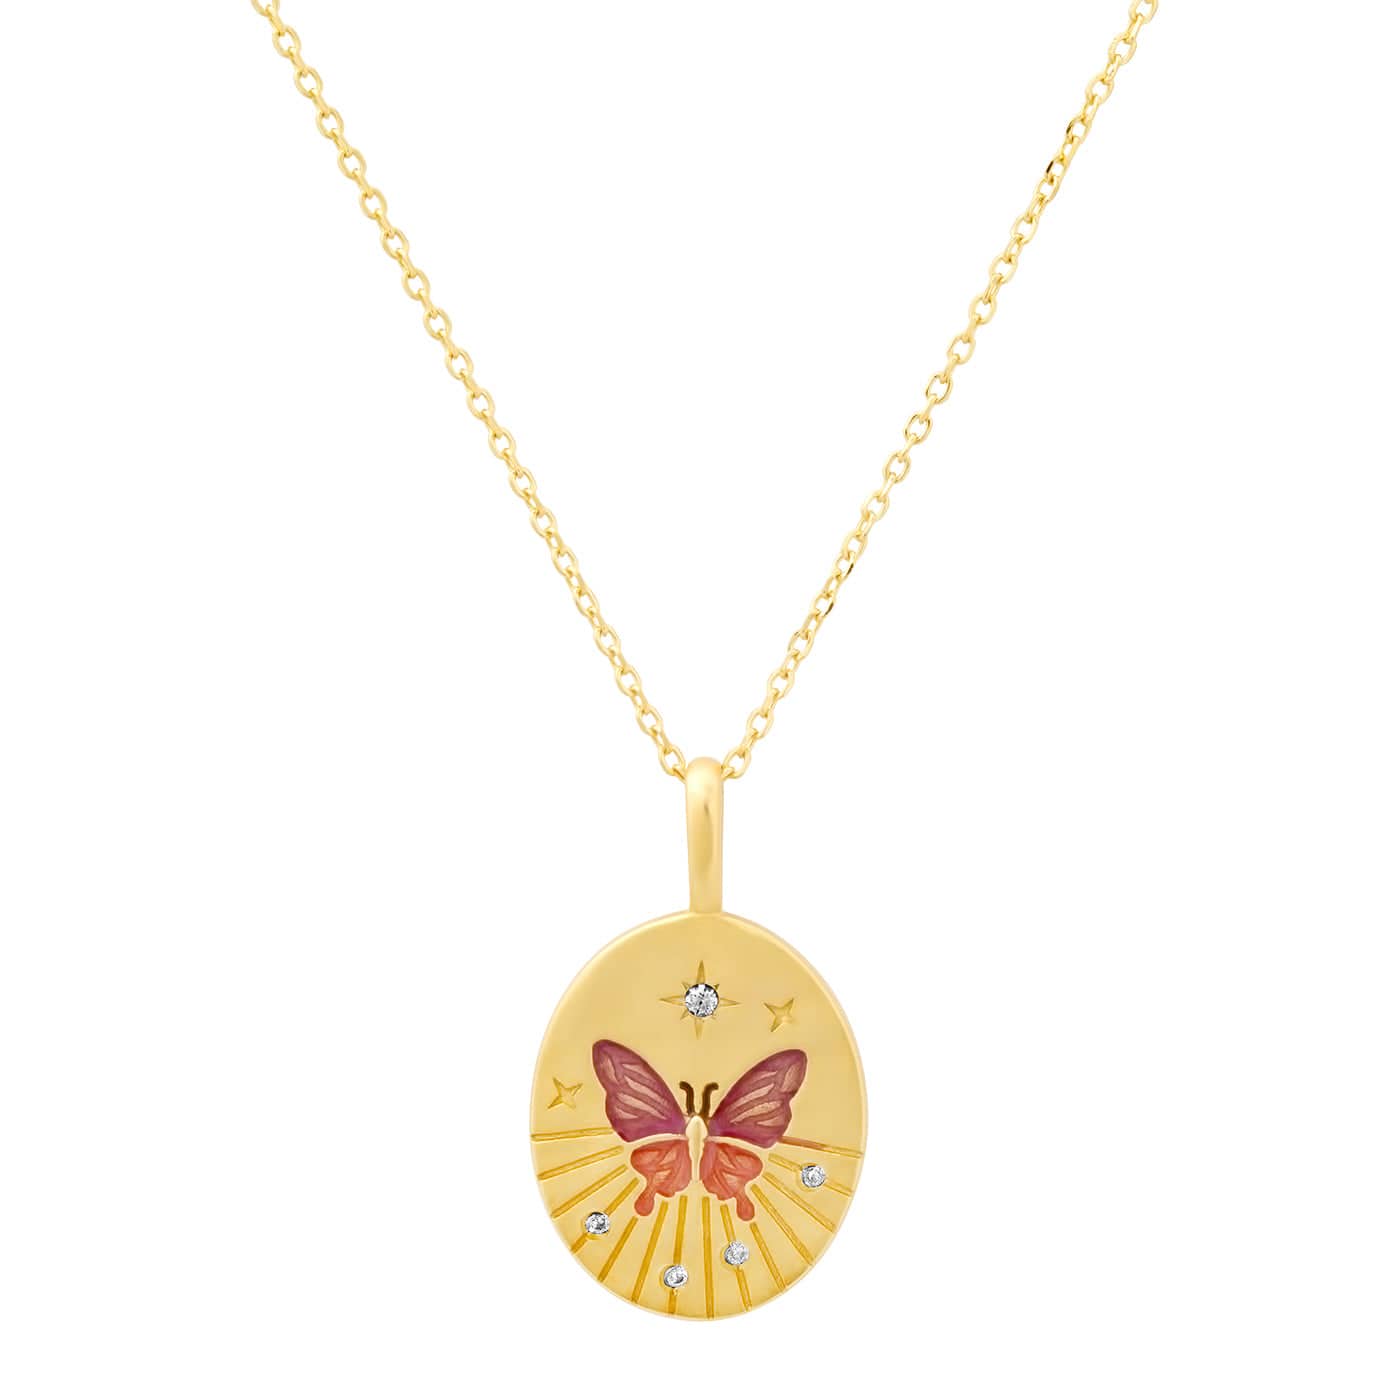 NKL-GPL Butterfly Coin Pendant Necklace